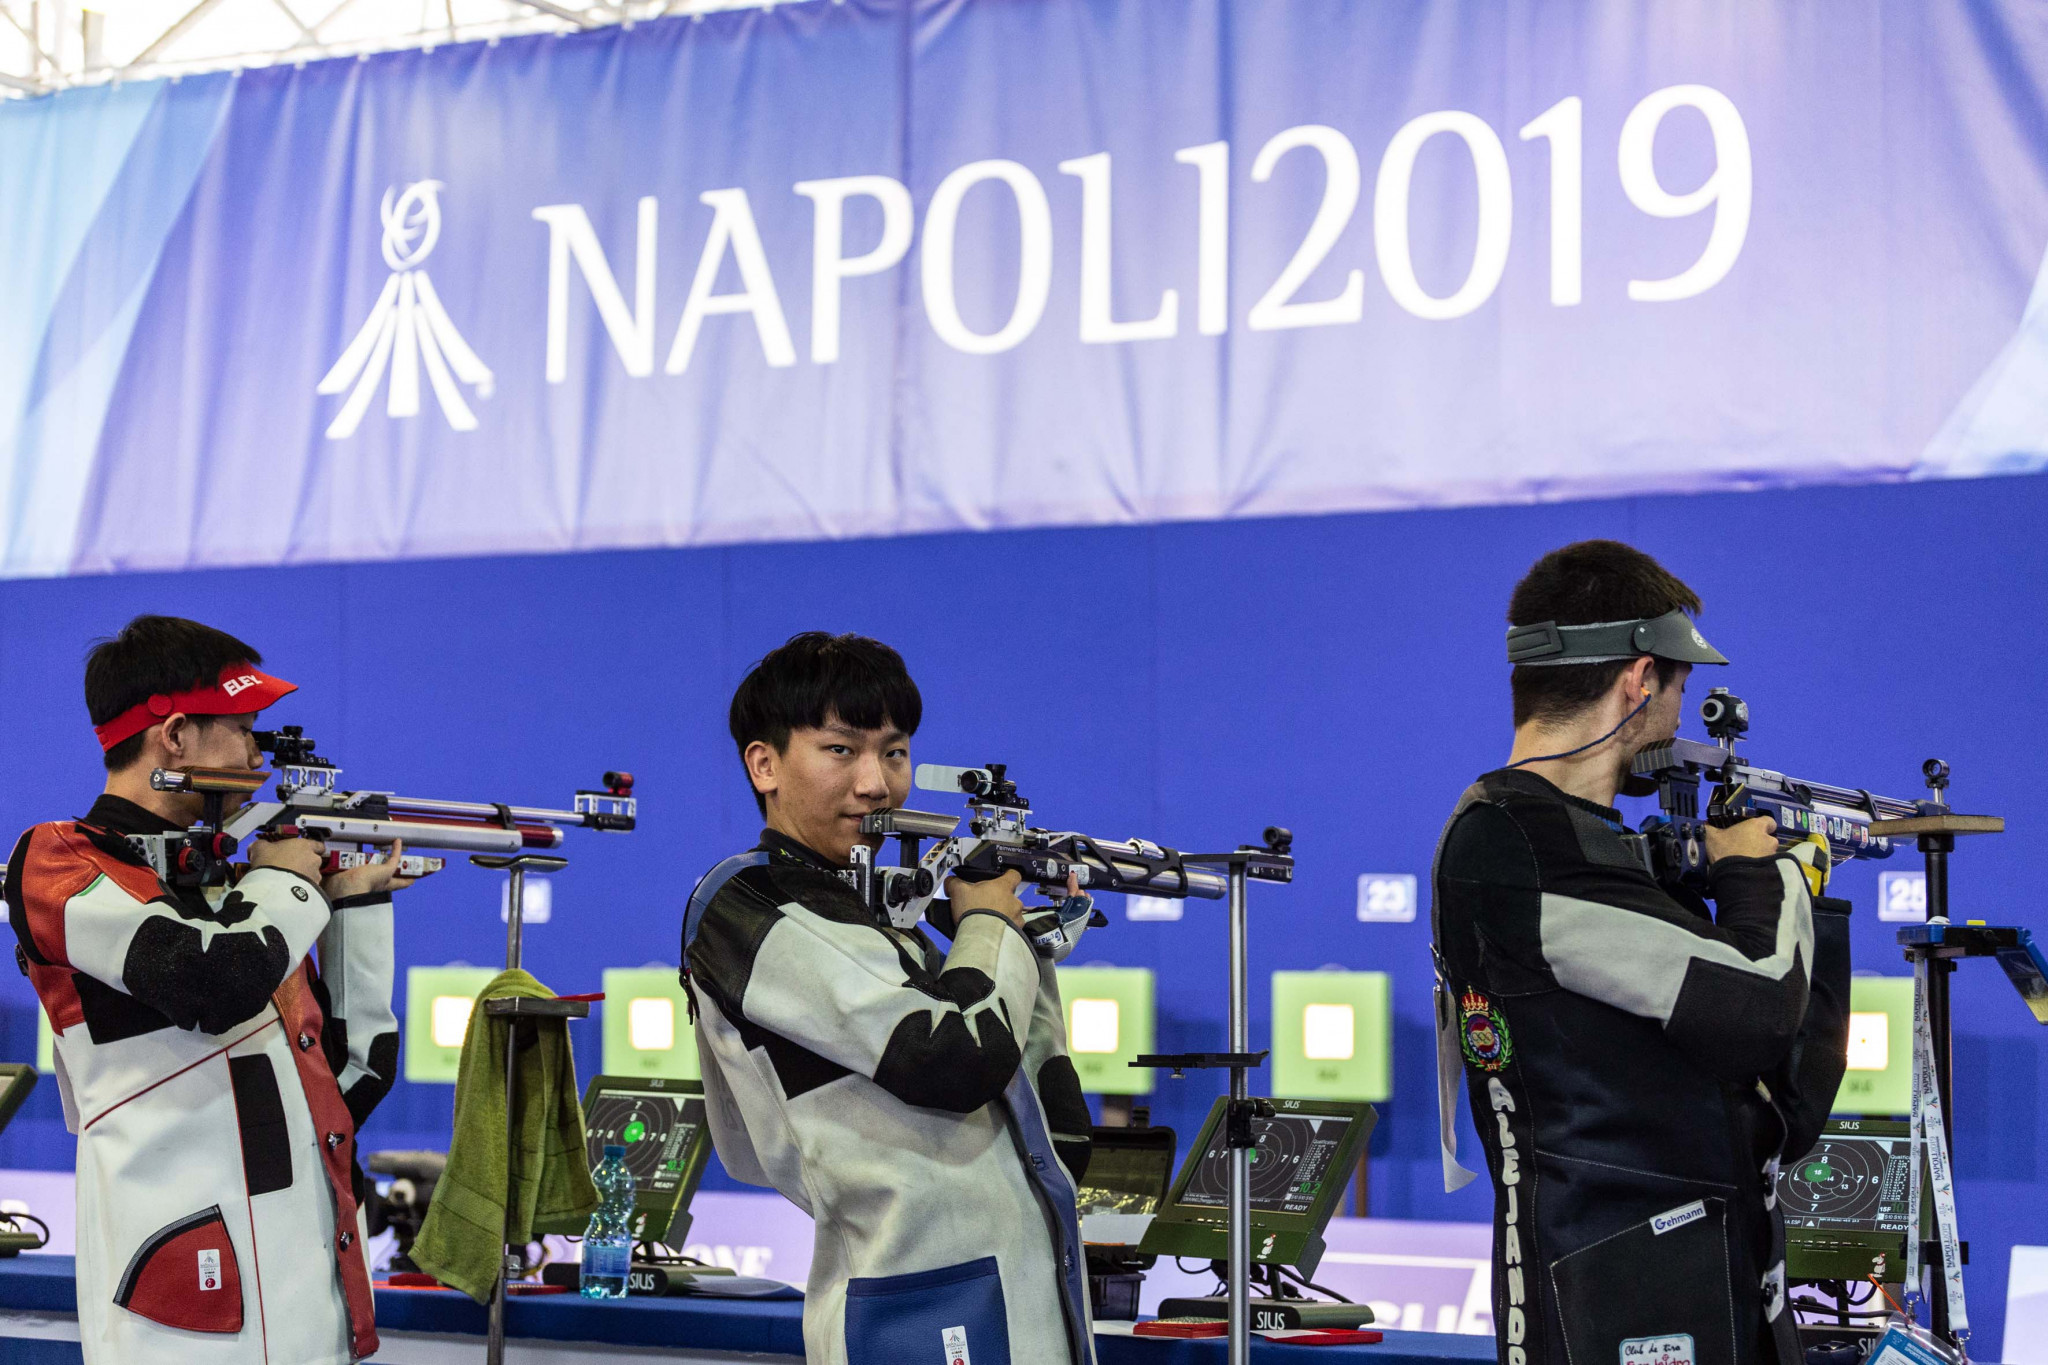 Naples 2019: Day four of competition